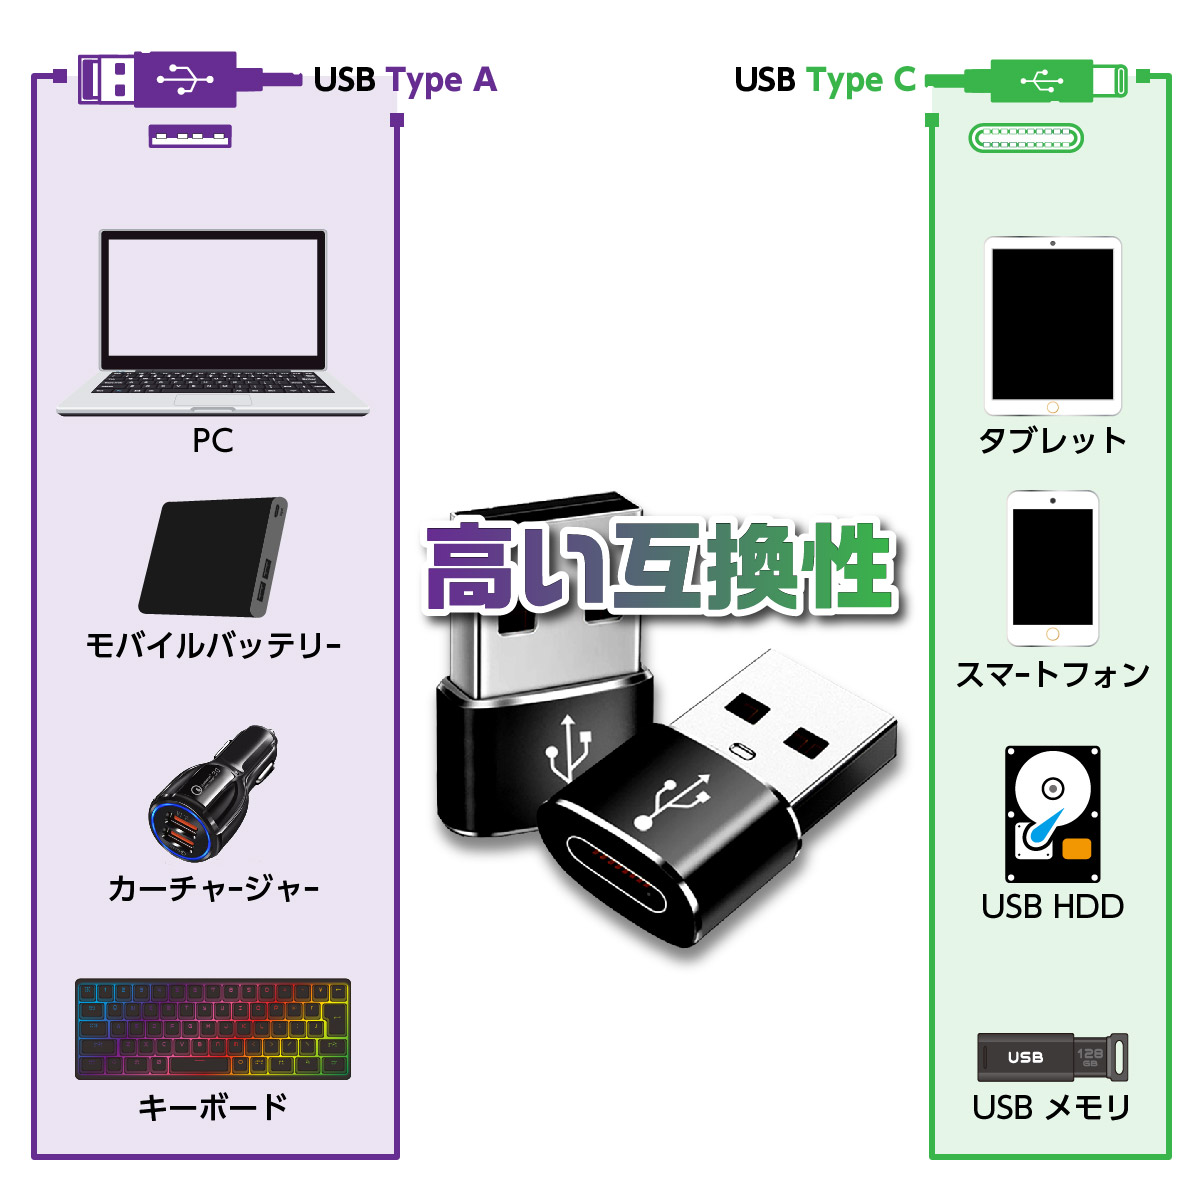 Type-C 変換アダプター USB Type-A 充電器 タイプC to USBタイプA iPhone スマホ HDD SSD パソコン ハブ データ転送 コンパクト 小さい｜heureux｜08